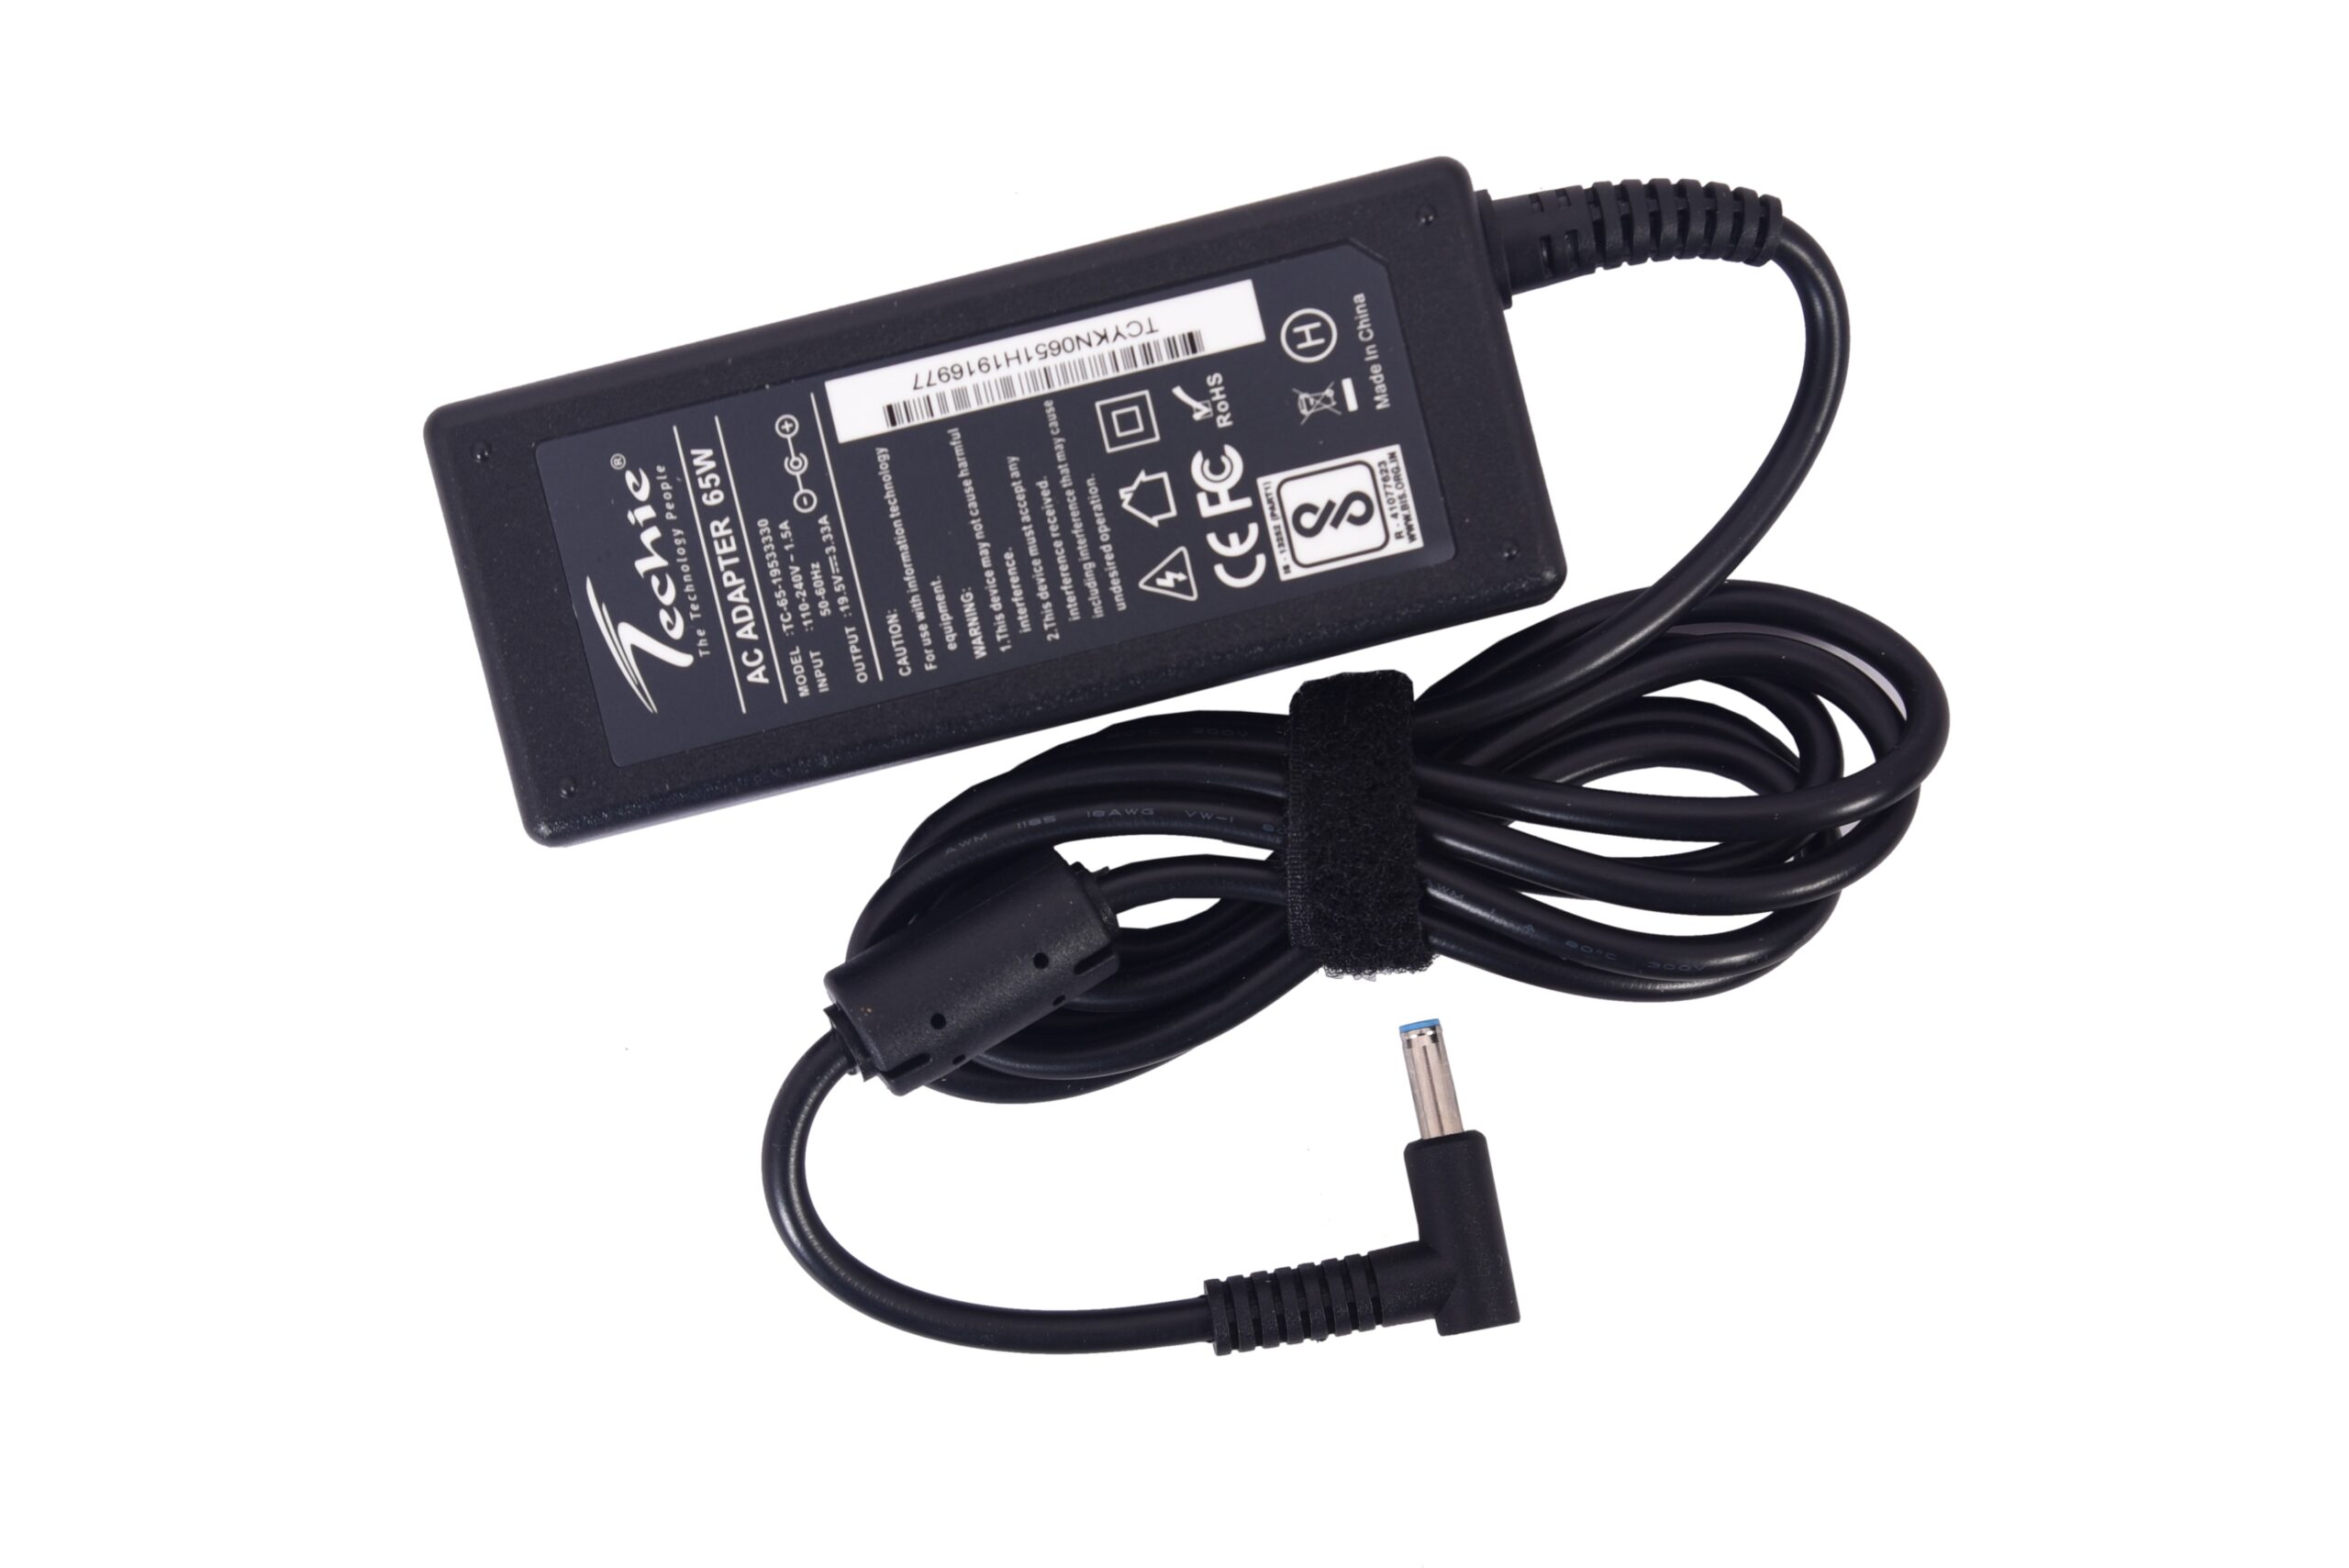 Techie Compatible HP 65W Laptop Charger for 250 G2 G3 G4 G5 15-R Series (19.5V, 3.33A)